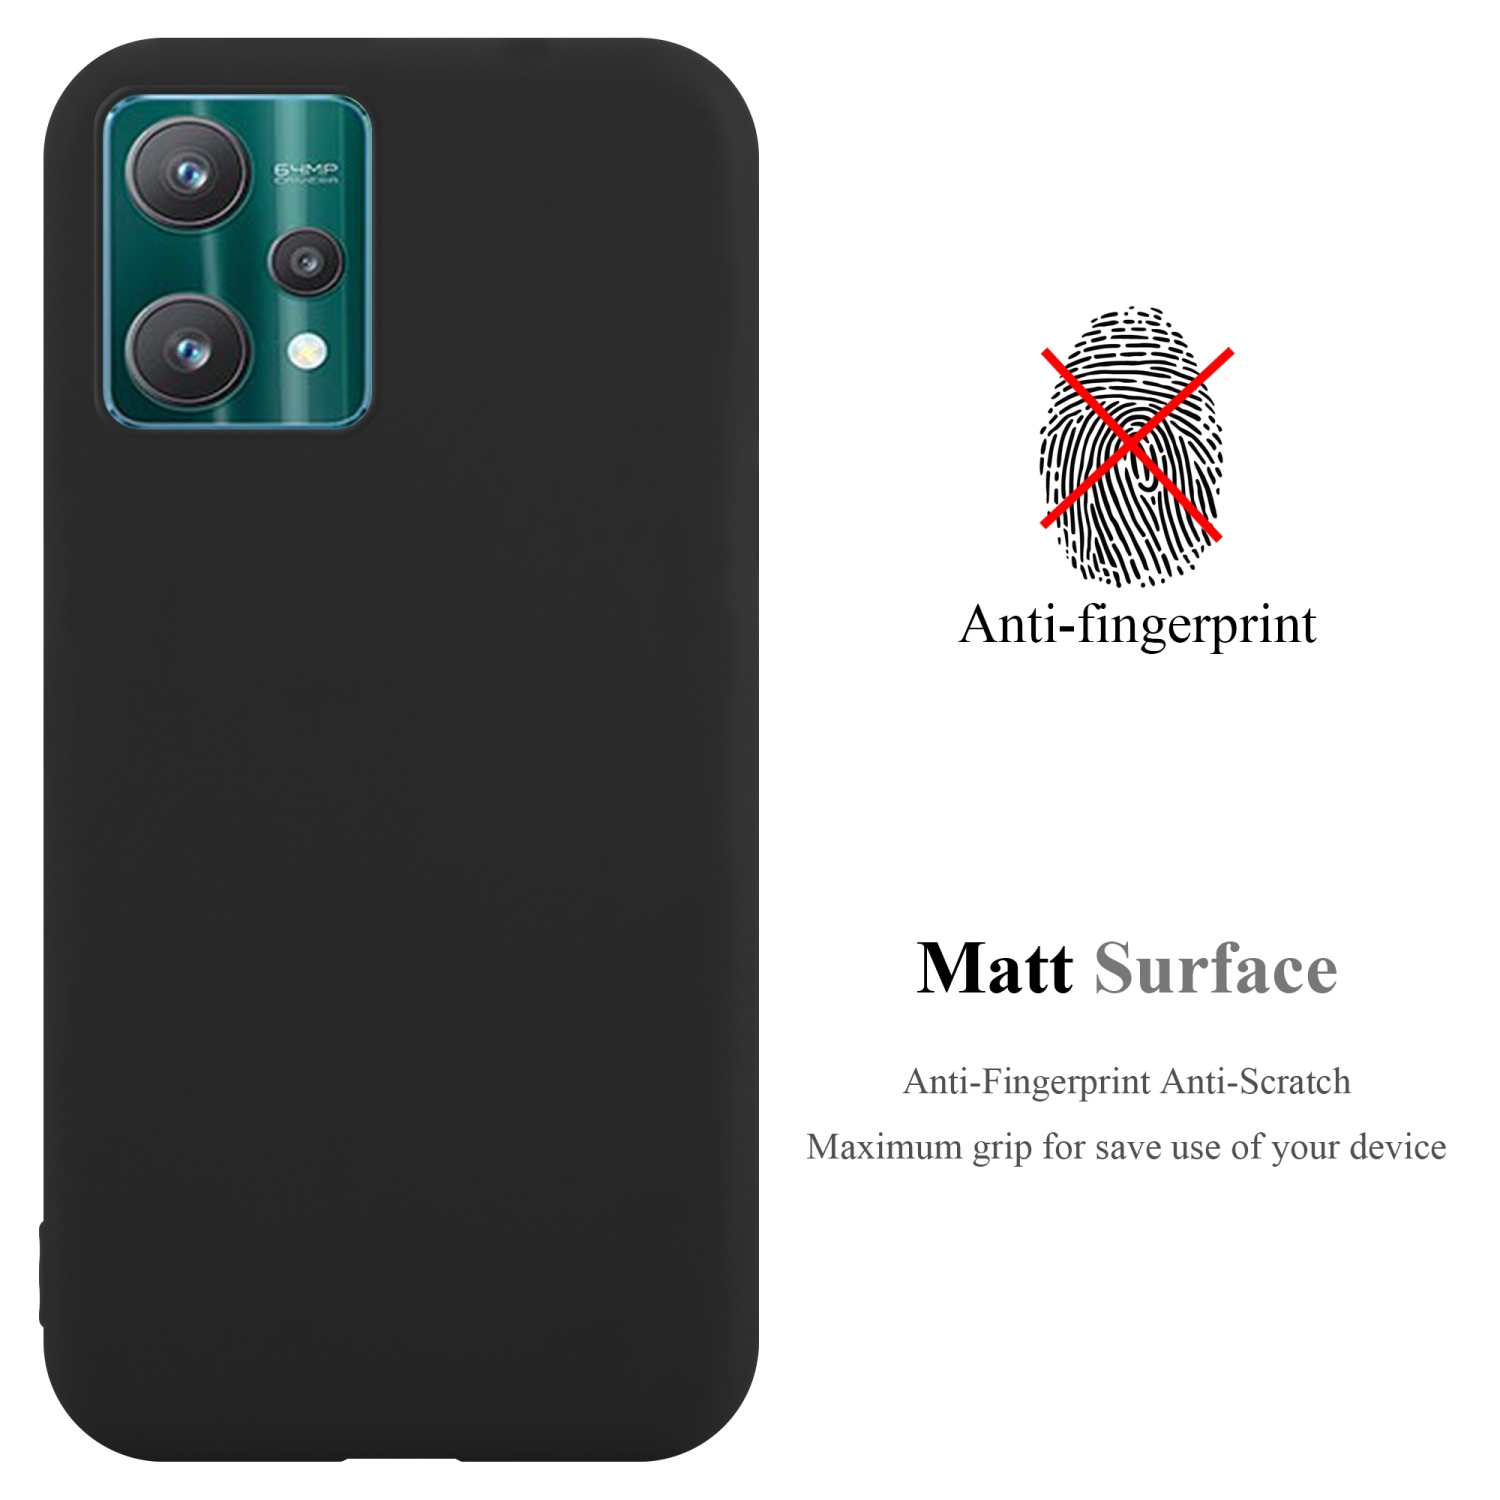 CADORABO Hülle im CE Style, PRO 9 / OnePlus Realme, / 2 5G, LITE / Nord Candy 9 V25 5G / Q5 TPU CANDY SCHWARZ Backcover